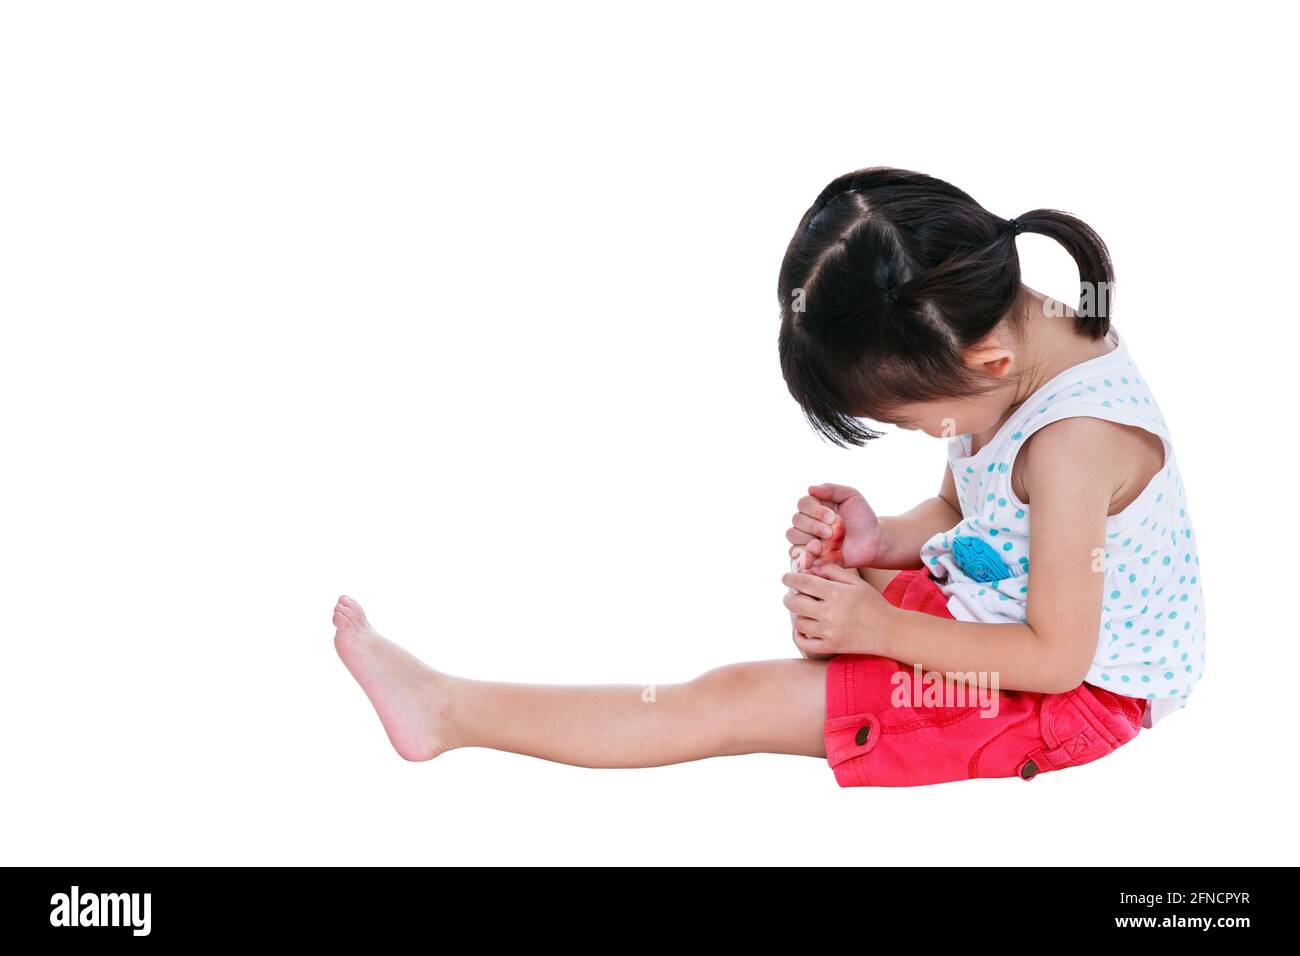 Full body of sad japanese child in pink skirt injured at toenail. Isolated on white background with copy space. Studio shot. Human healthcare and prob Stock Photo